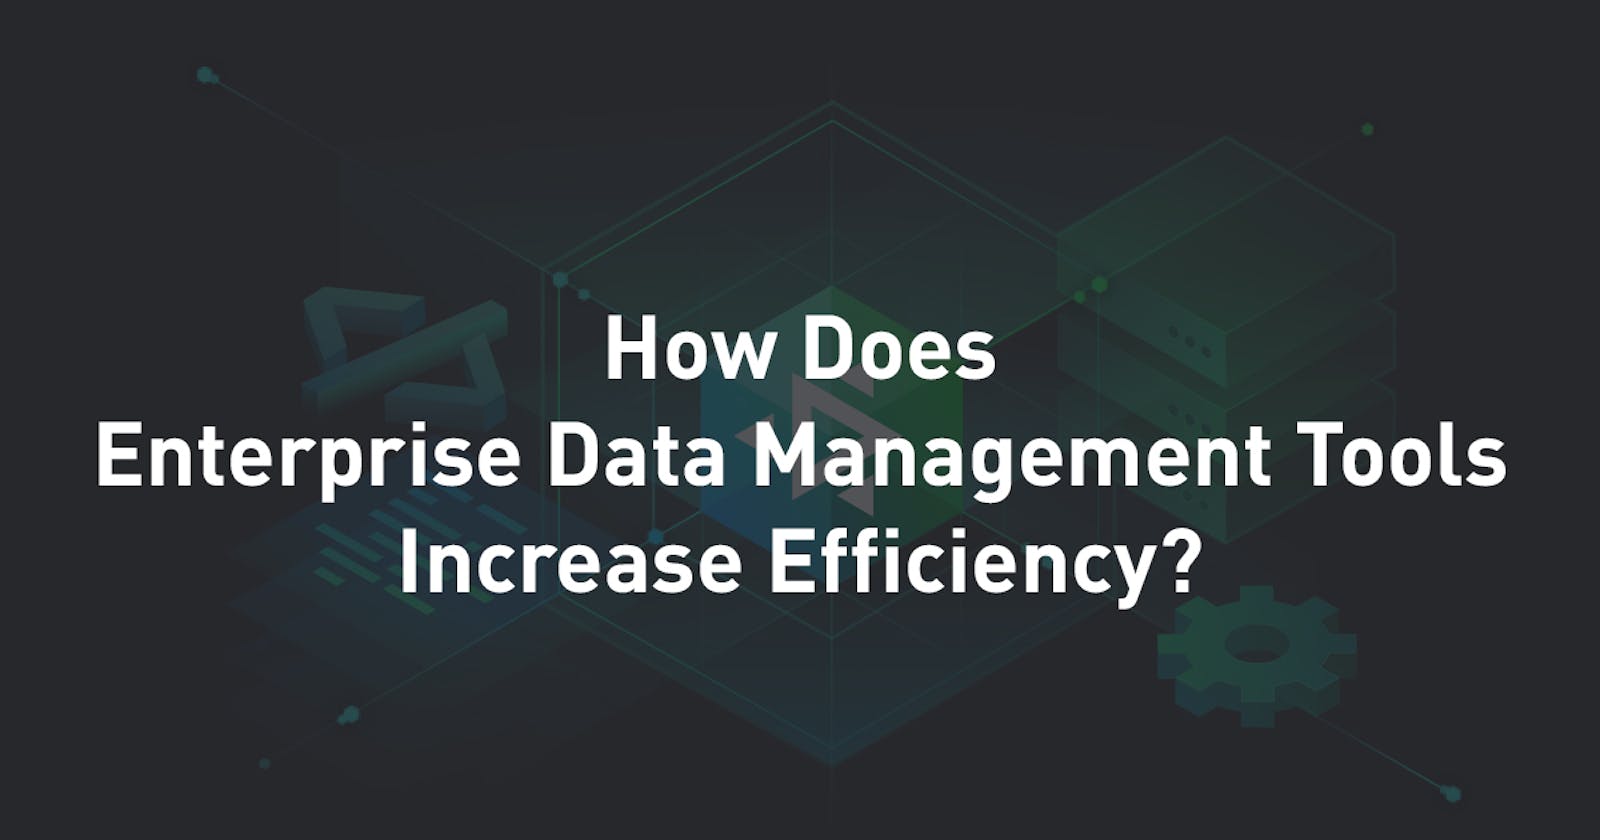 How Does Enterprise Data Management Tools Increase Efficiency?